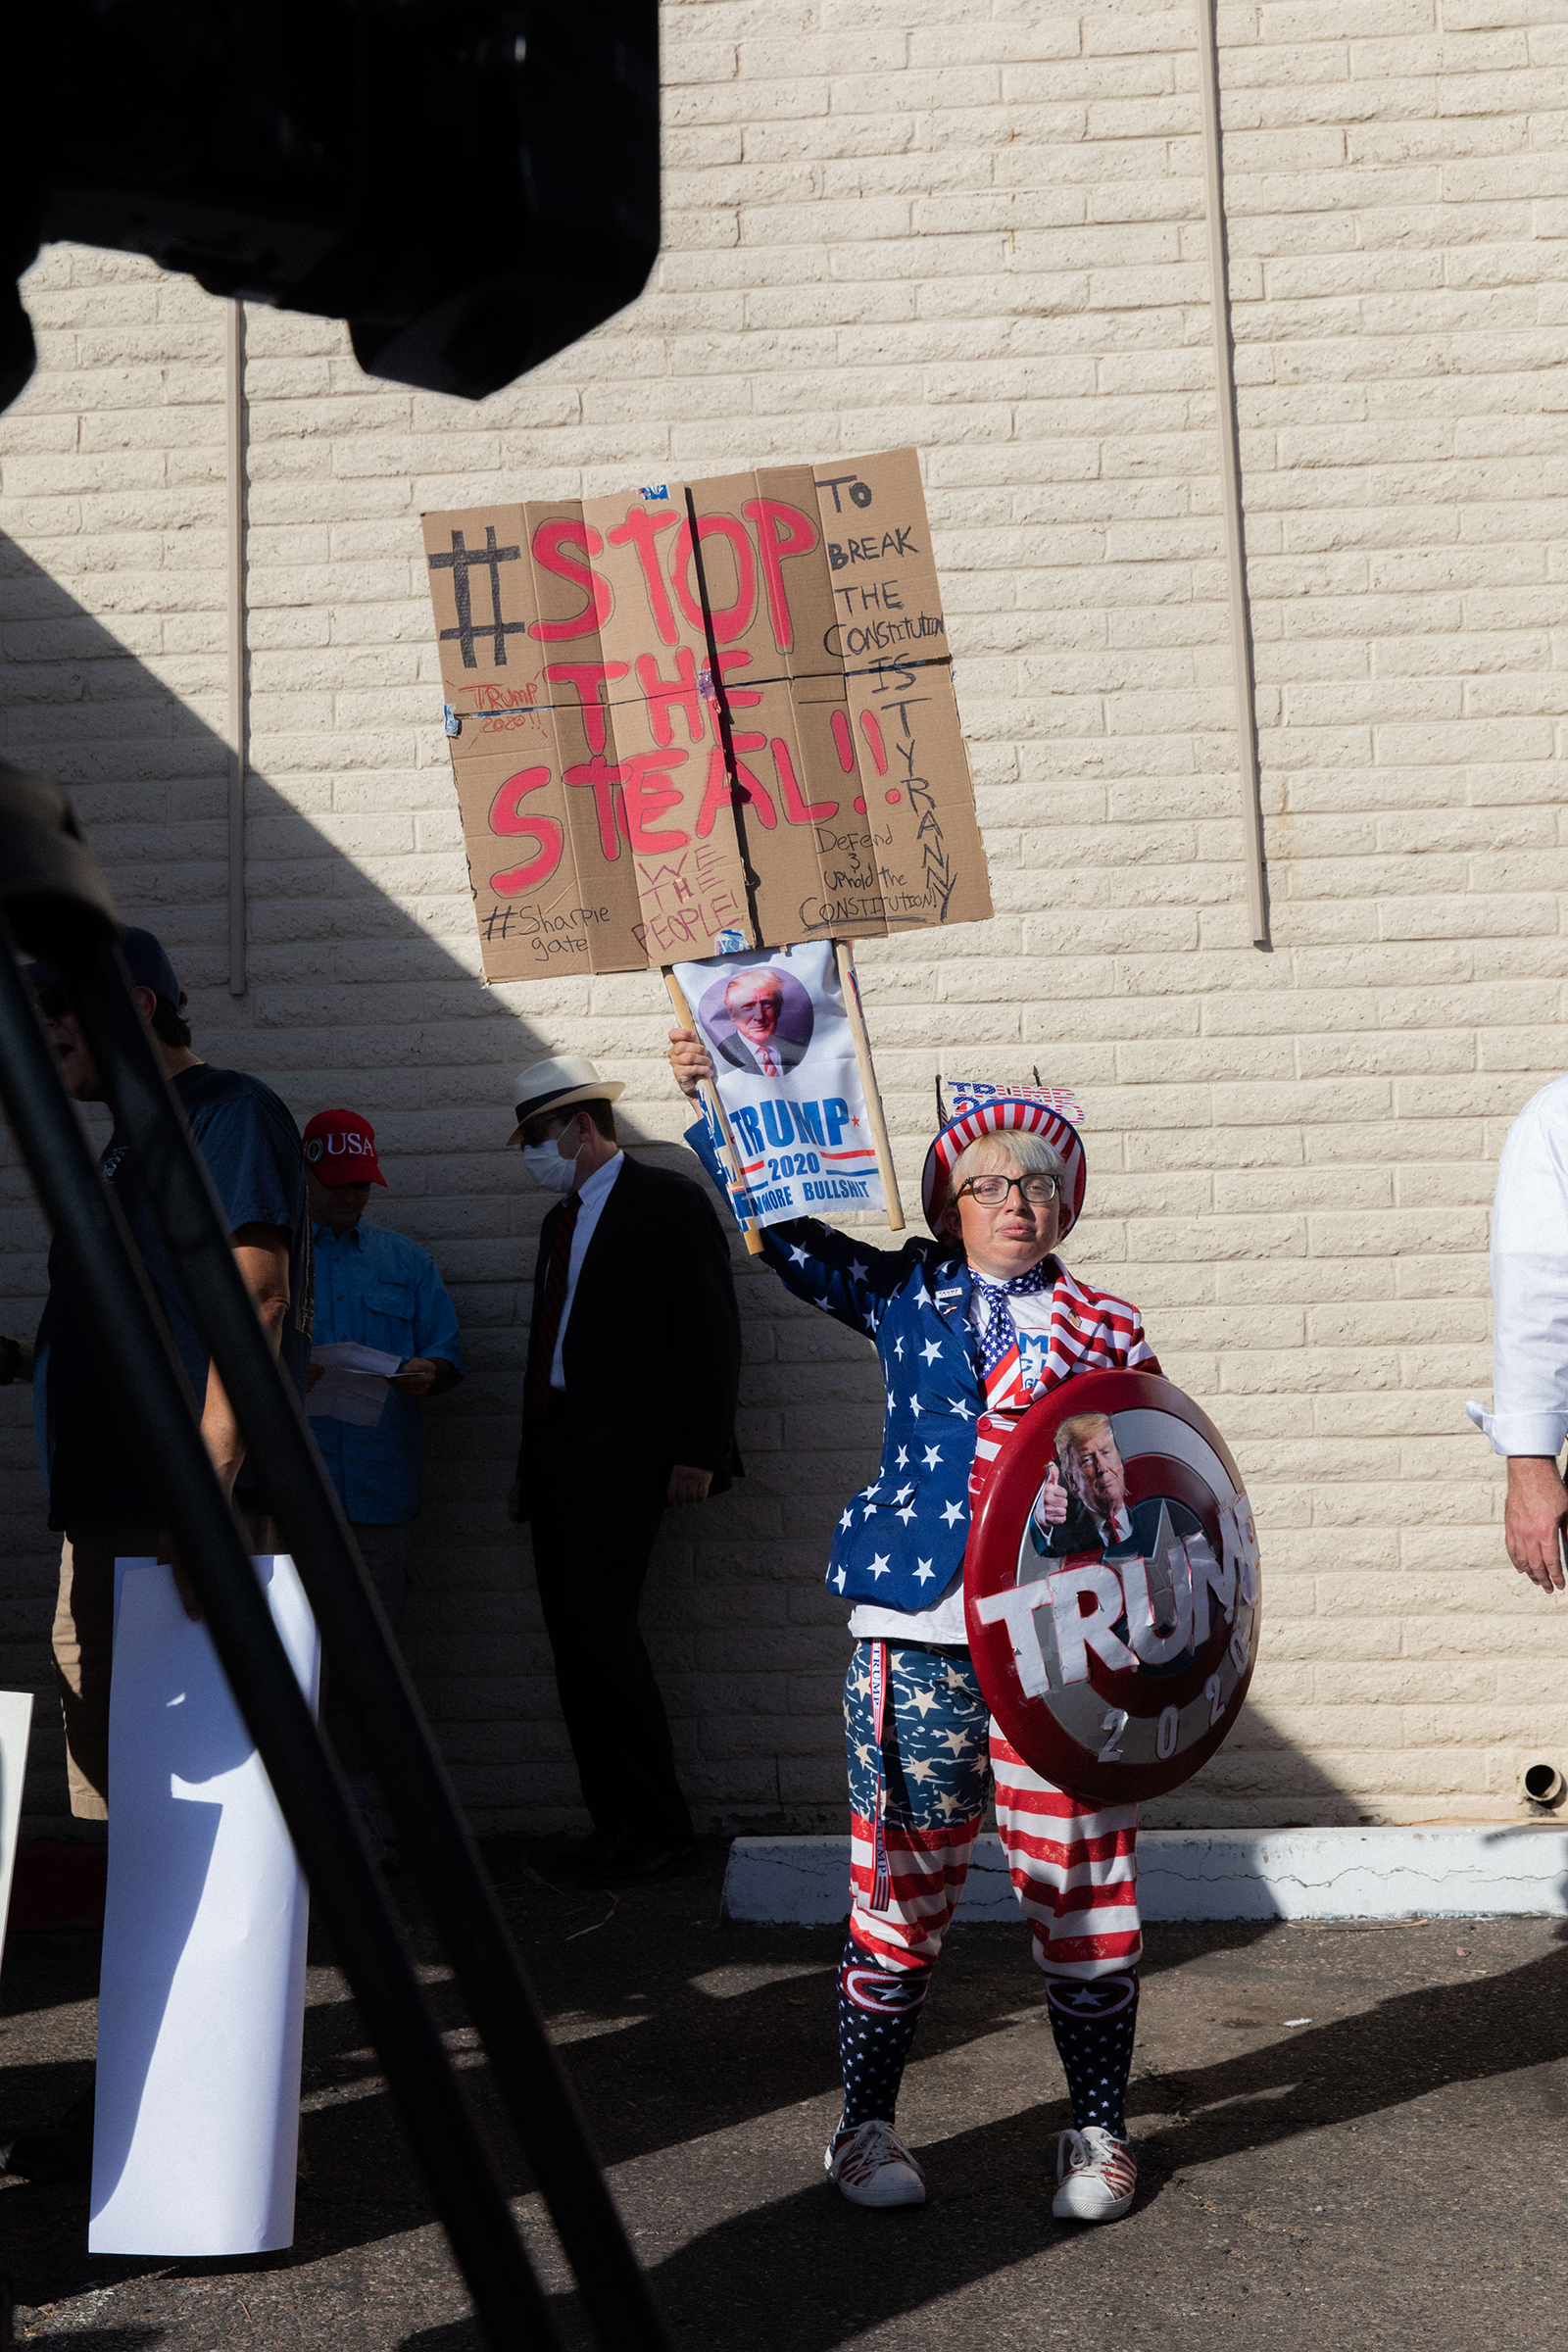 Trump supporters gathered outside the Maricopa County Republican Party office in Phoenix on Nov. 5